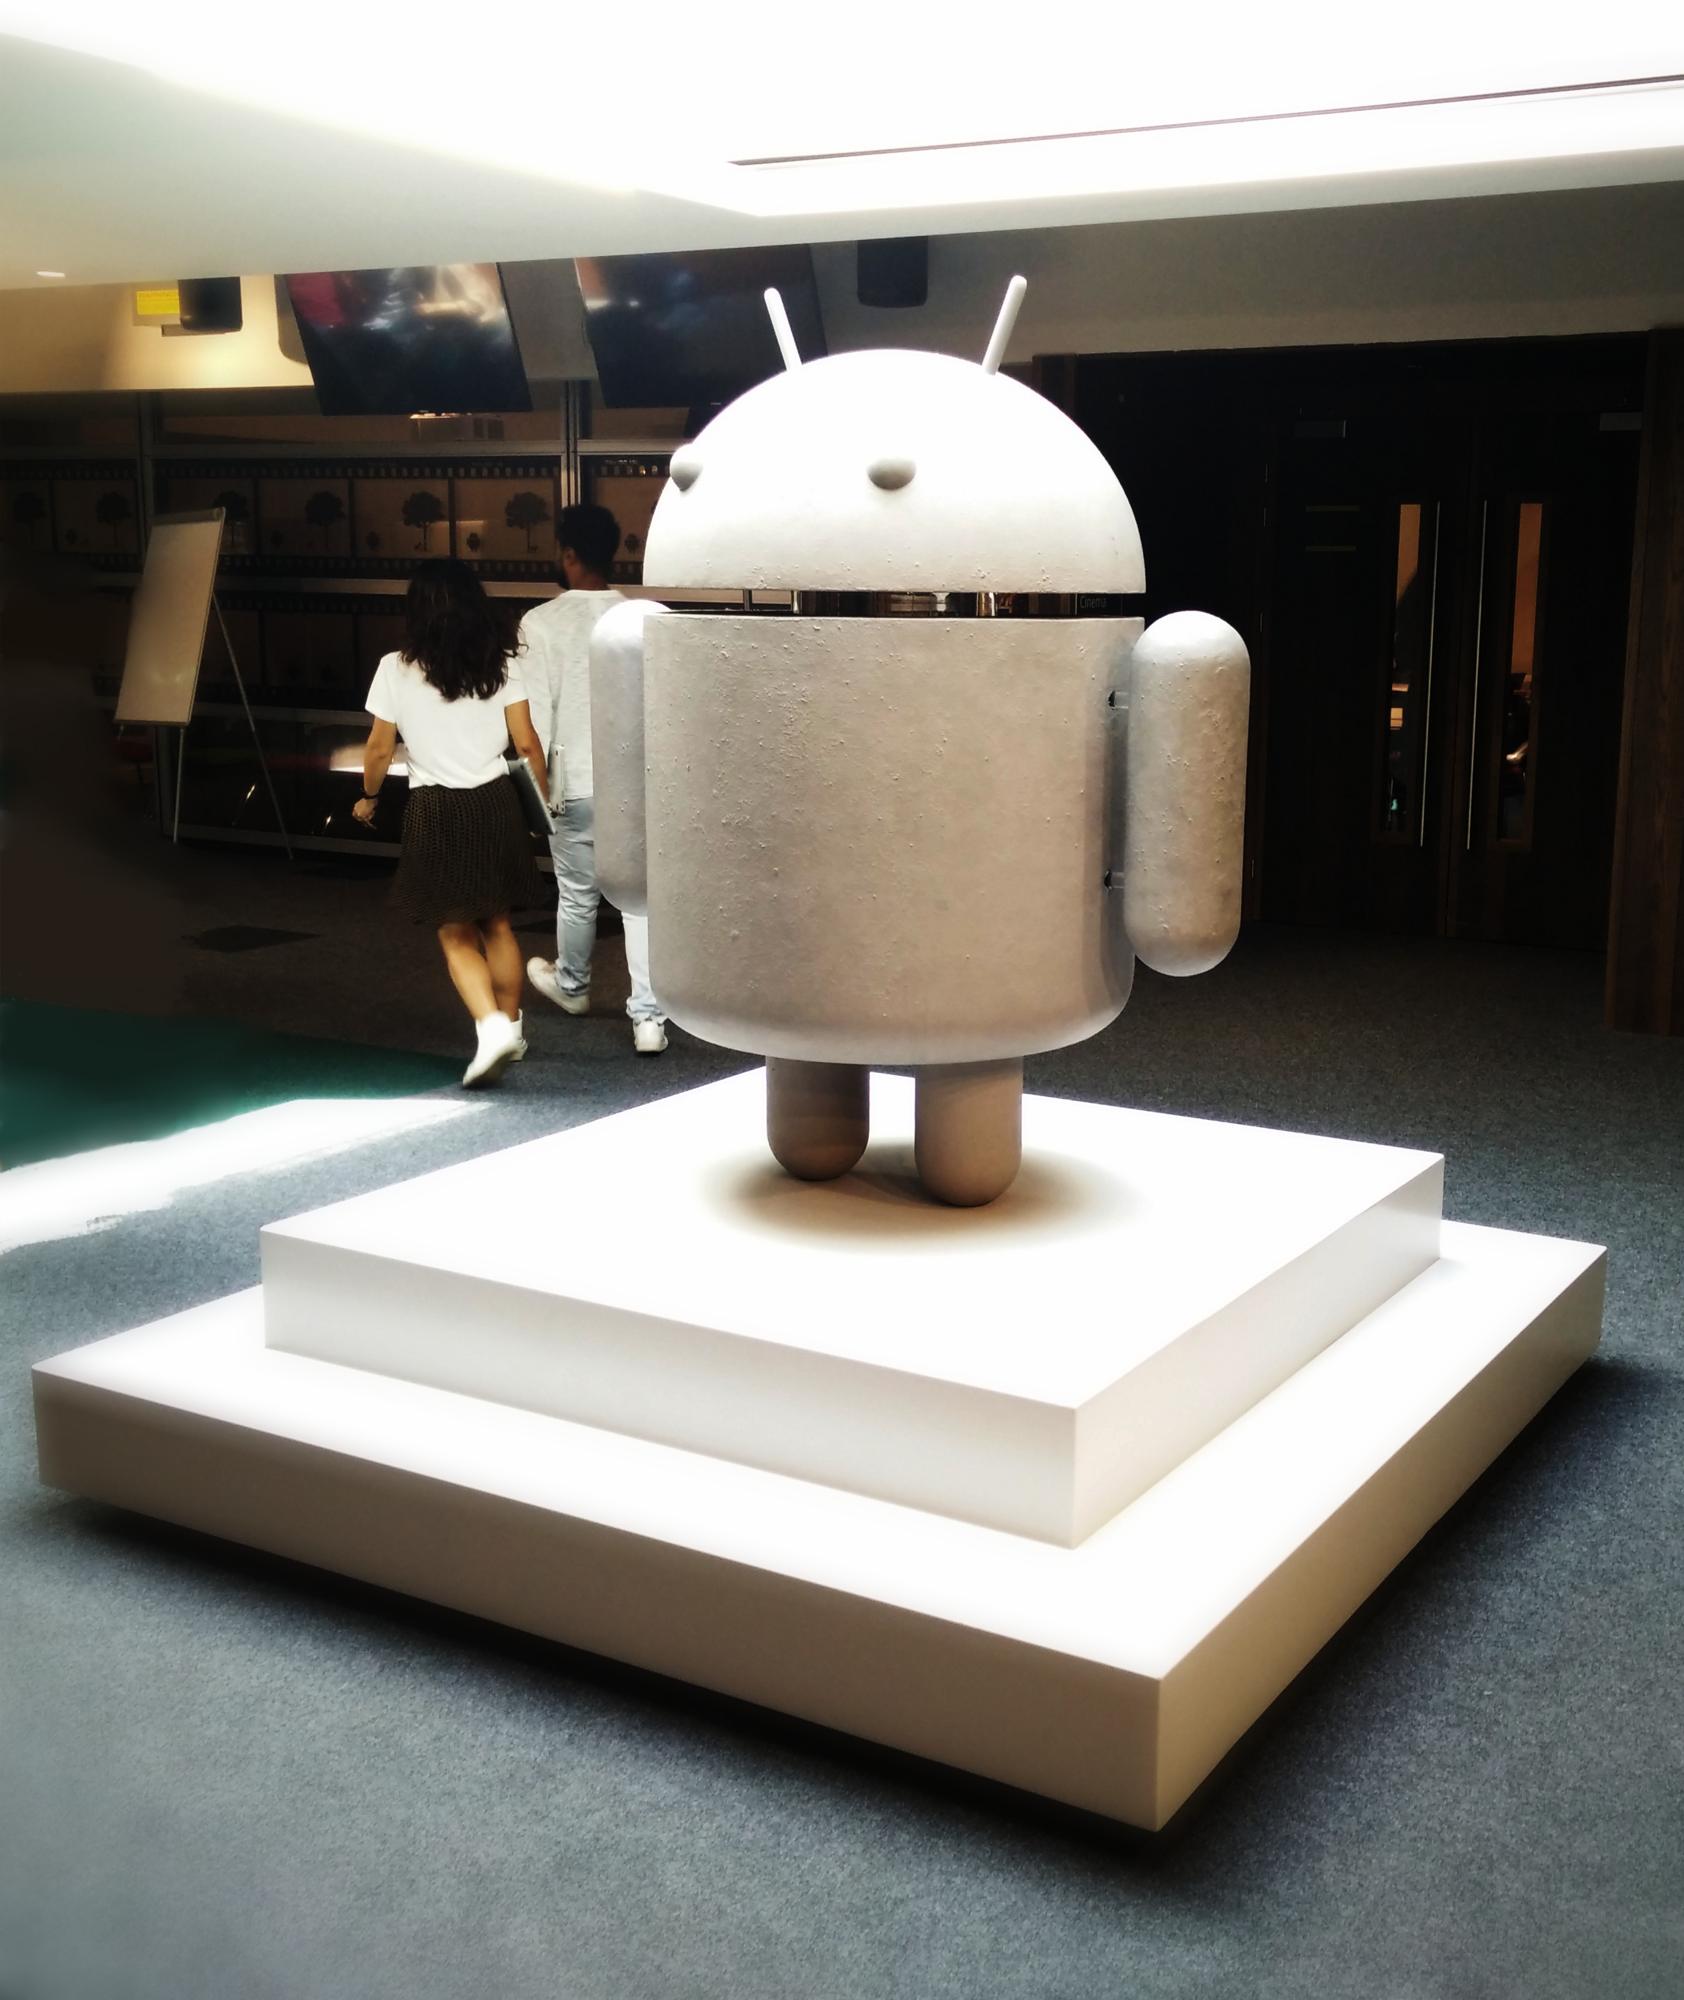 A life-sized android statue in Google's Dublin office